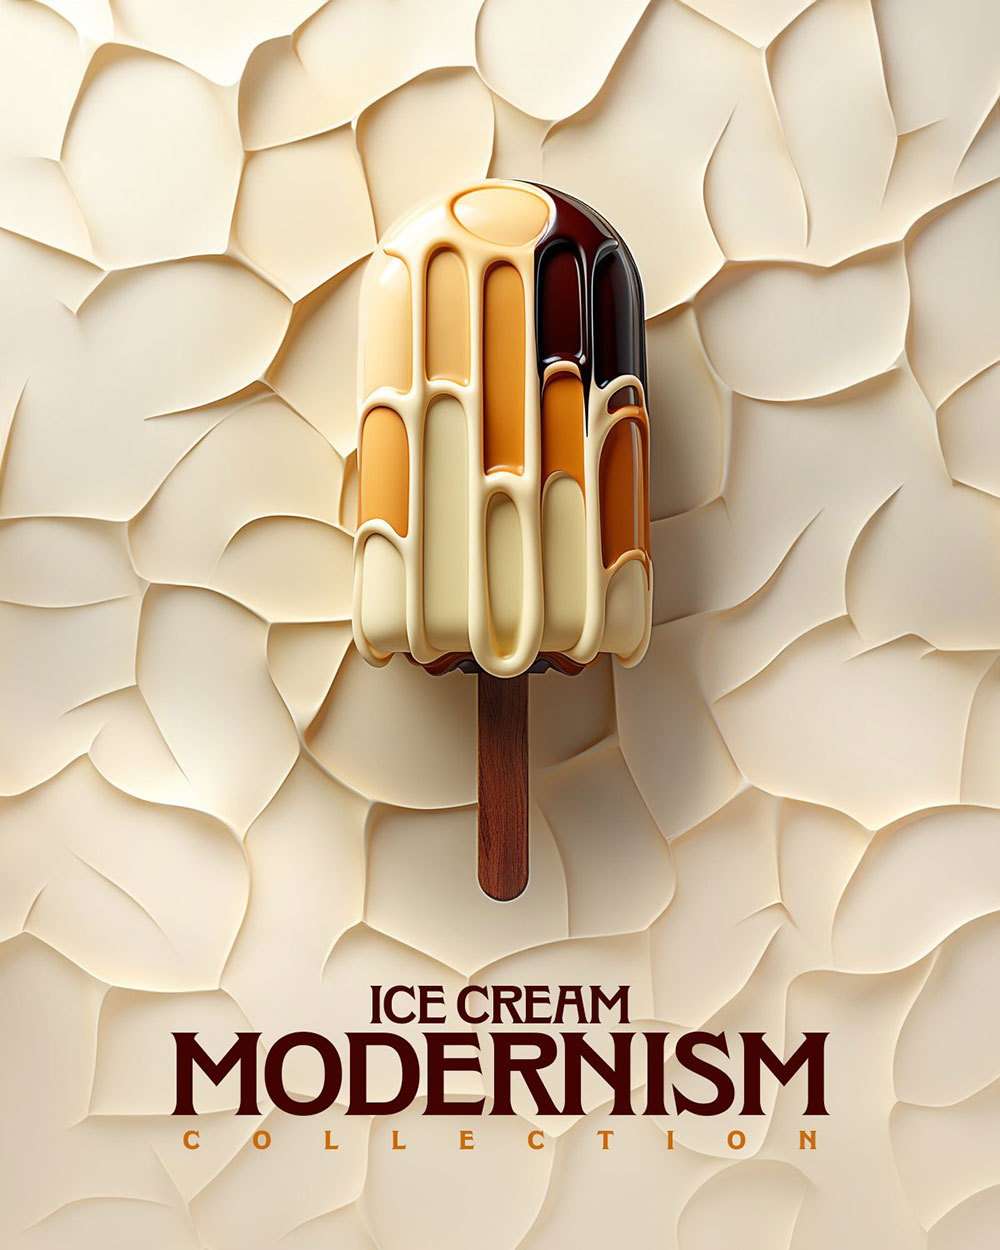 Ice cream inspired by modernism - created in Midjourney